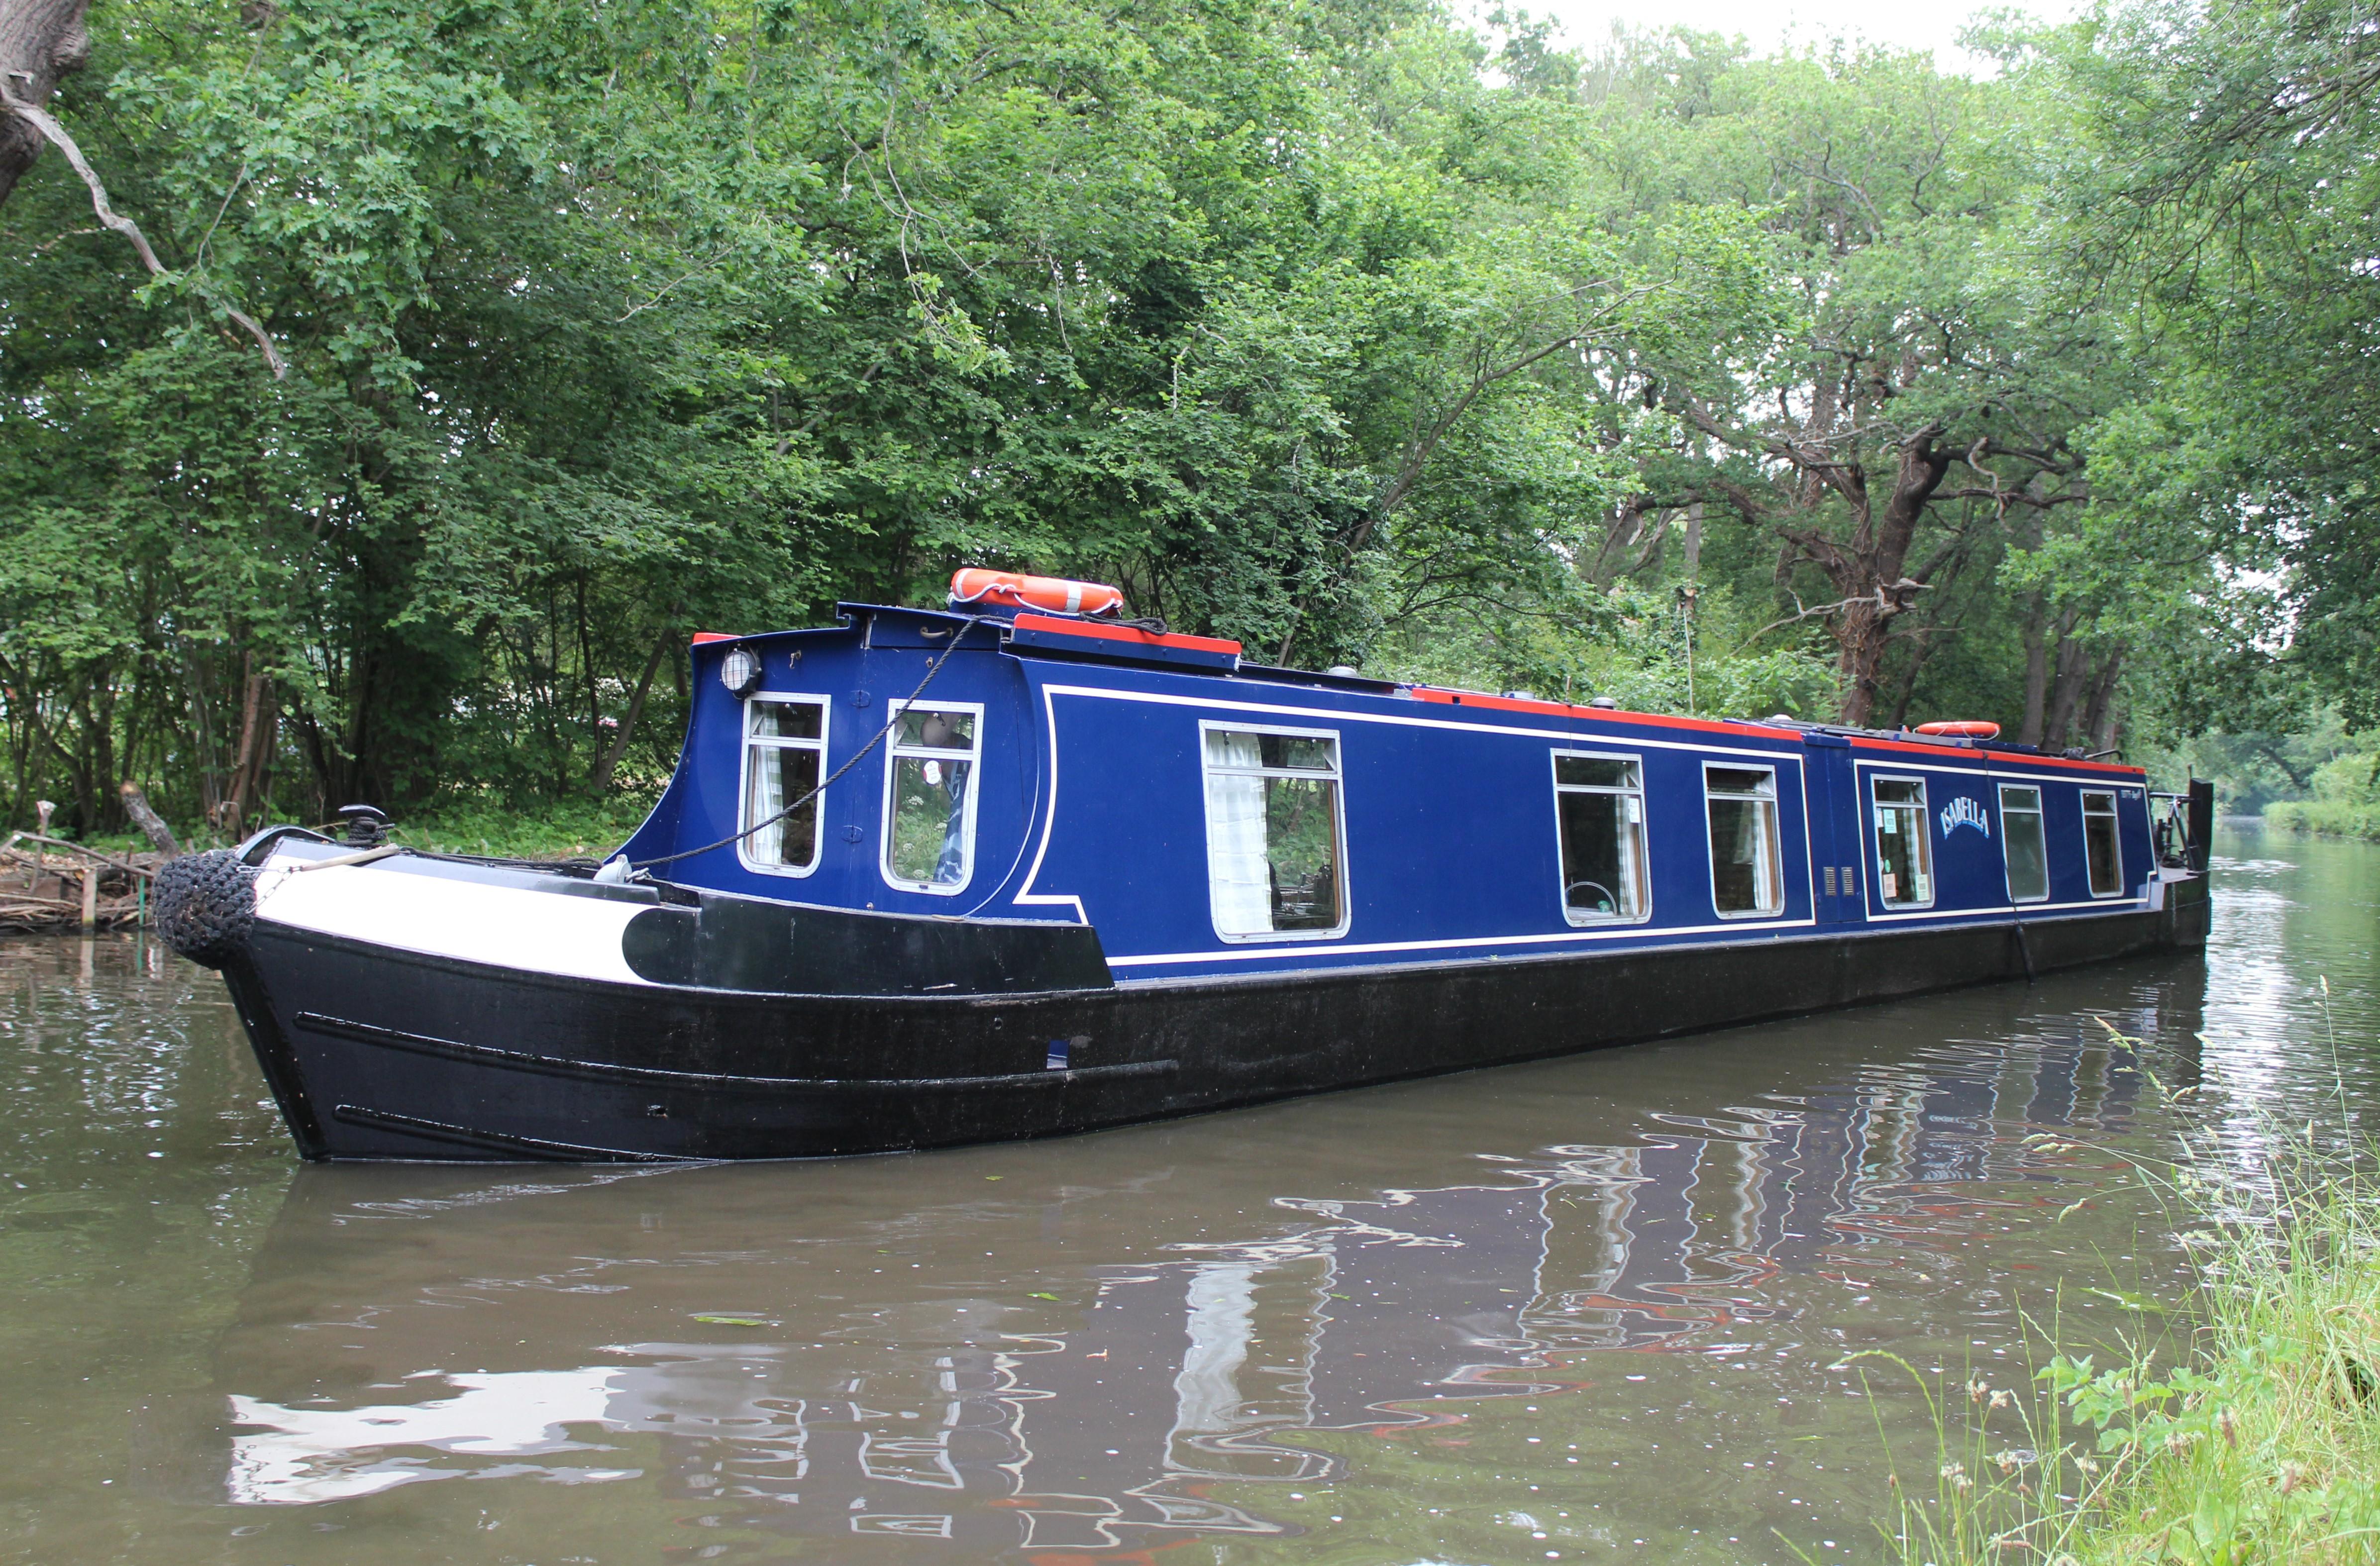 2007 Narrowboat 62' Starline with Cabin Lift, Pyrford Surrey - boats.com